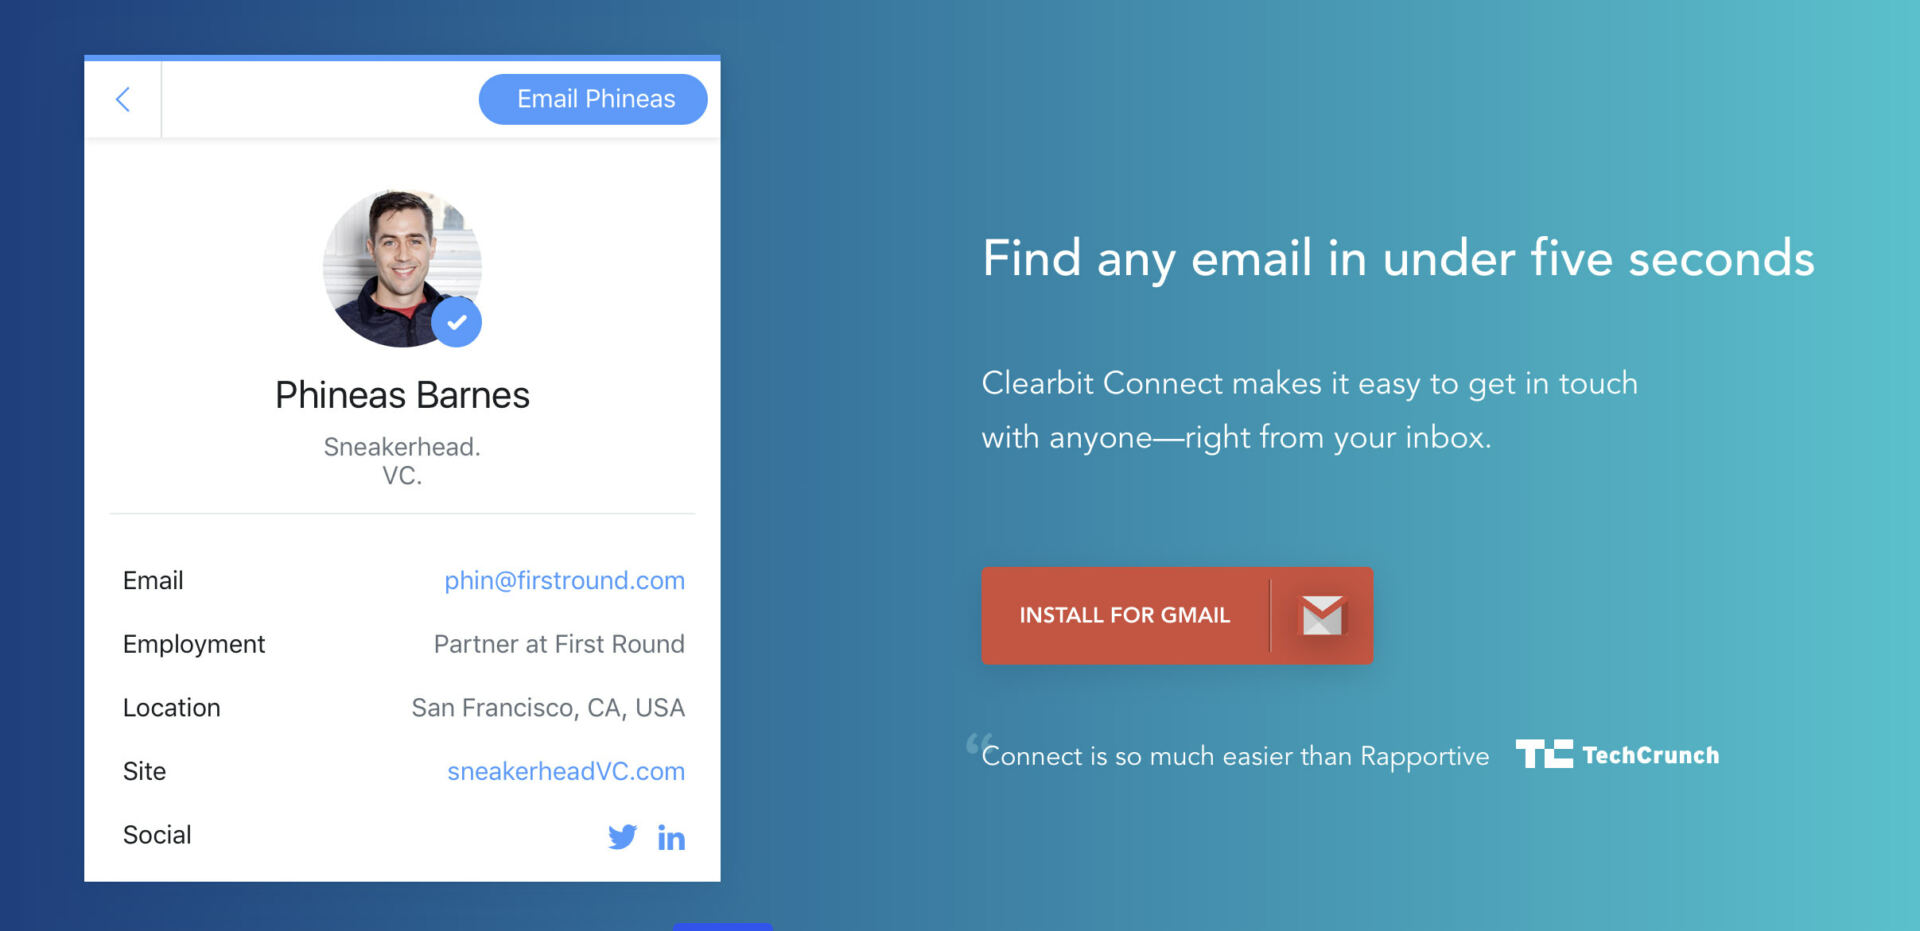 Clearbit-Connect email finder